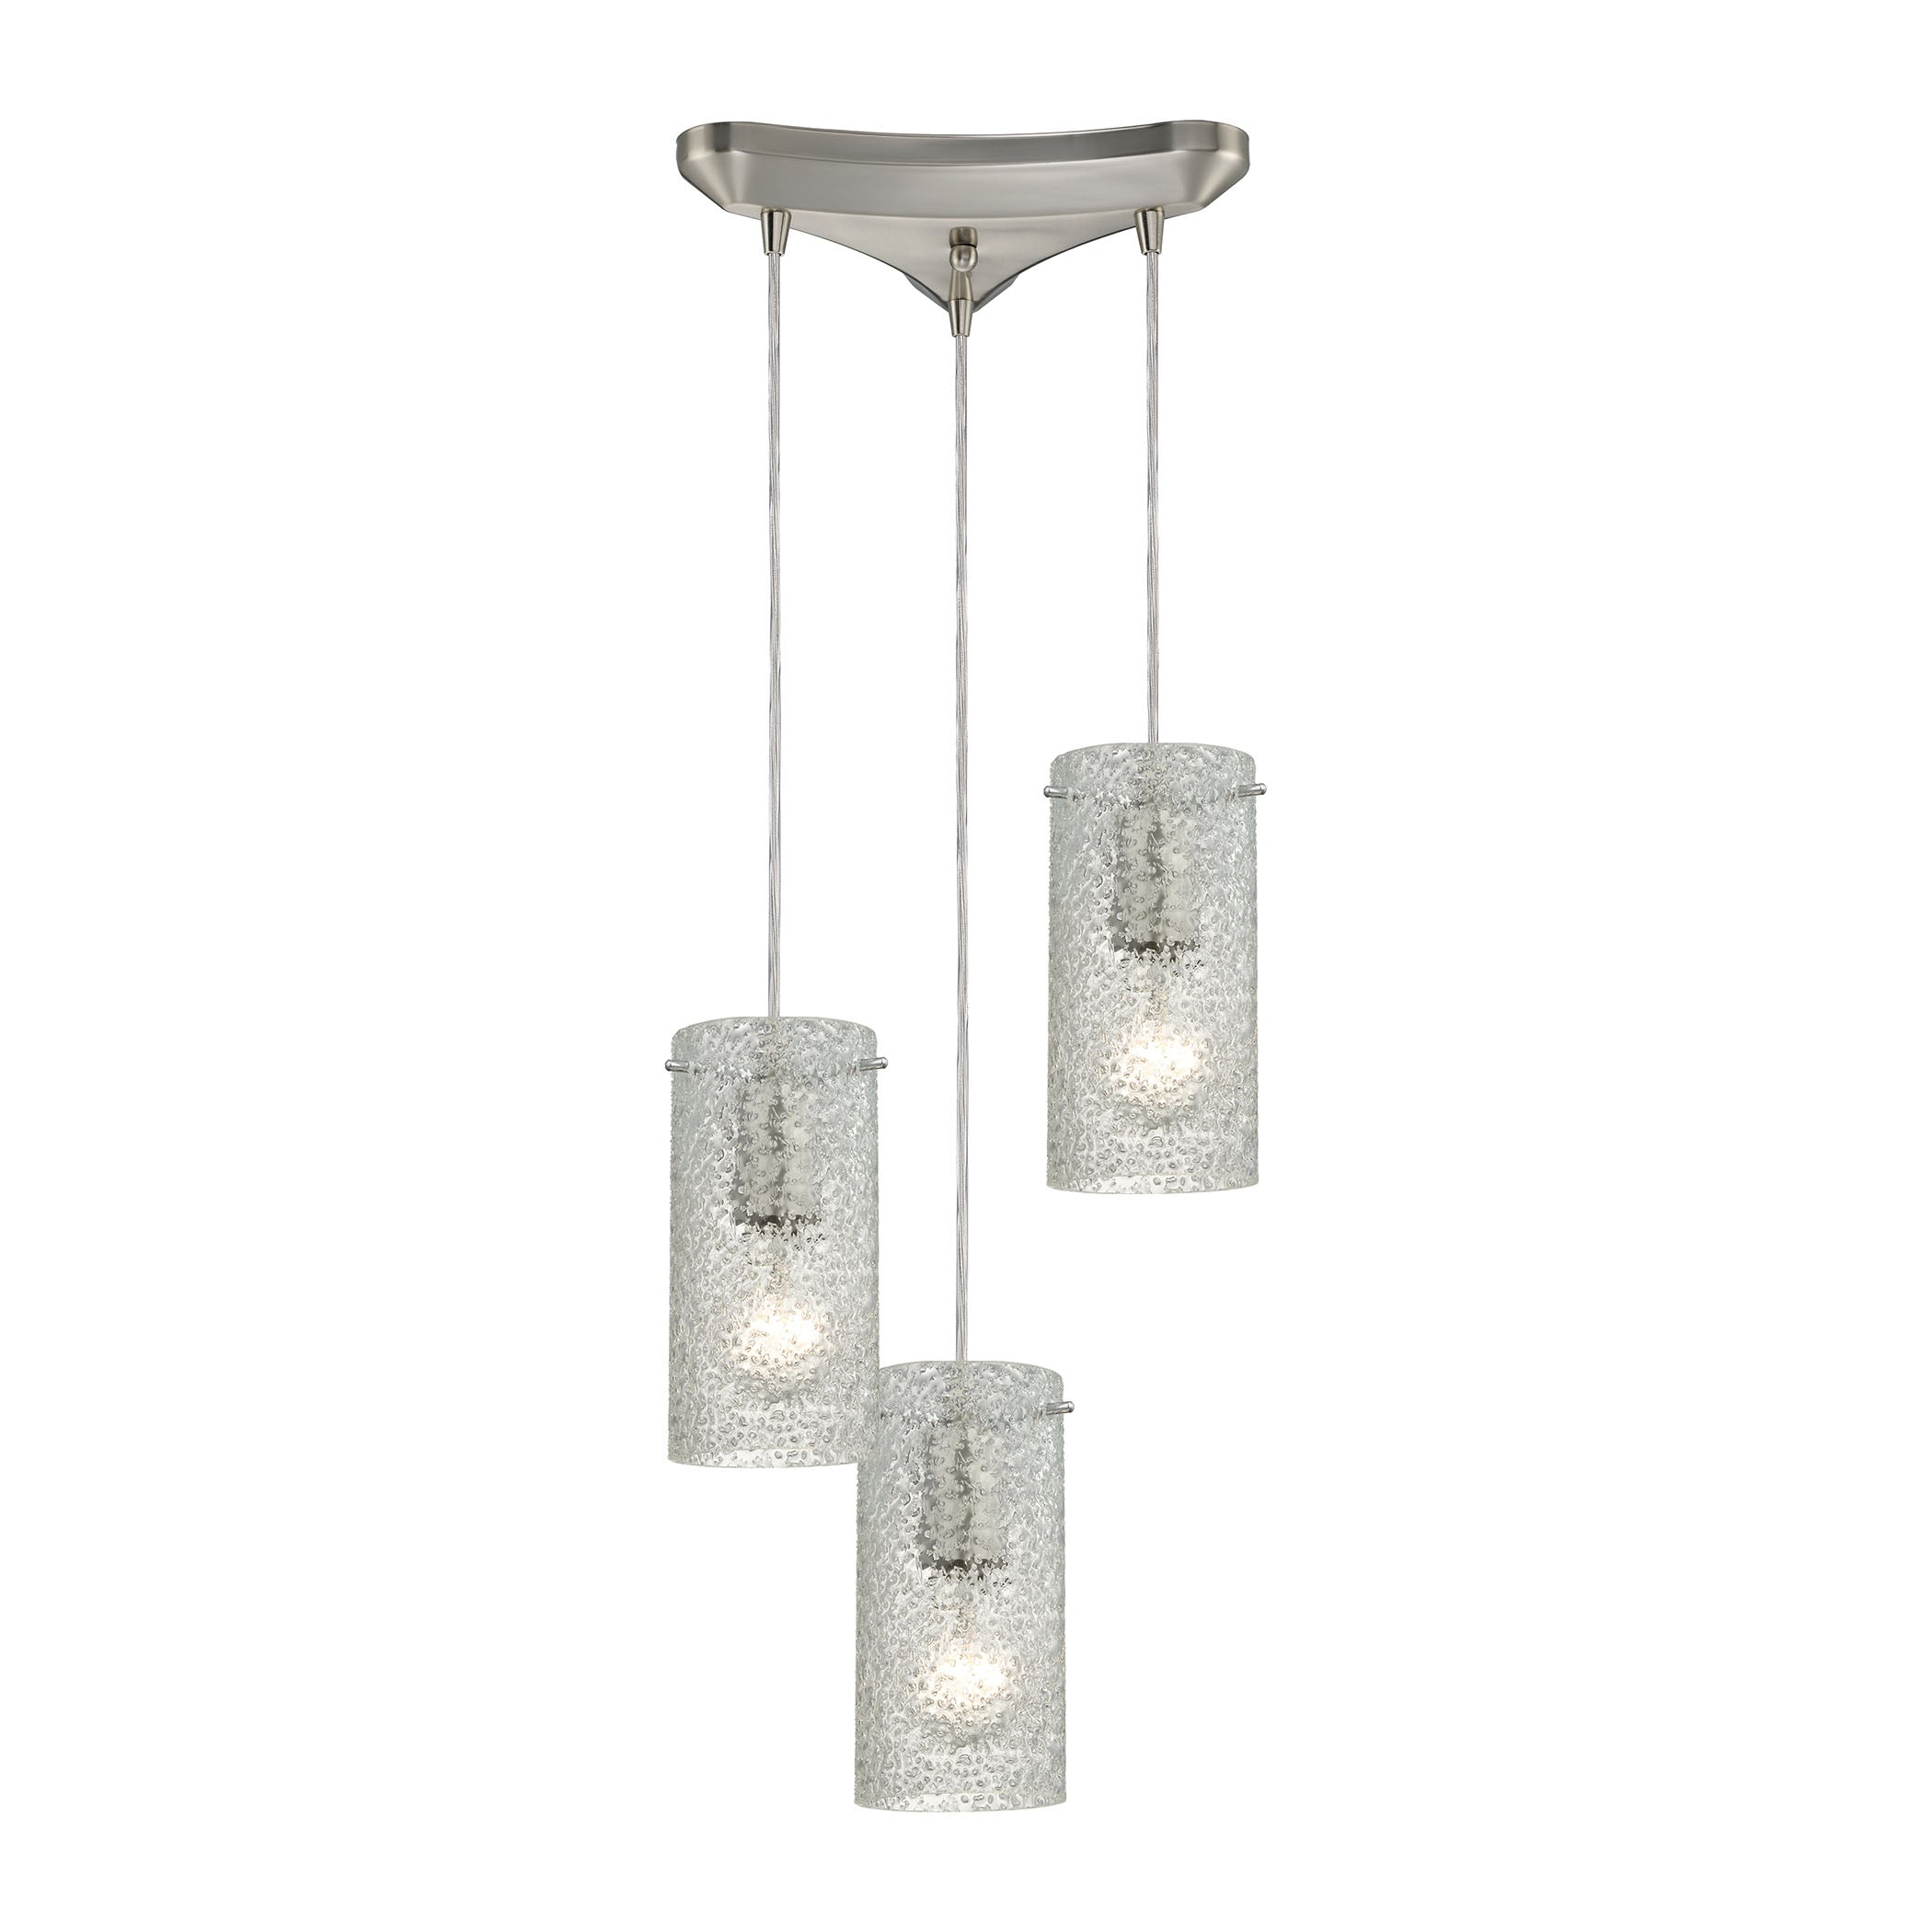 ELK Lighting 10242/3CL Ice Fragments 3-Light Triangular Pendant Fixture in Satin Nickel with Clear Glass